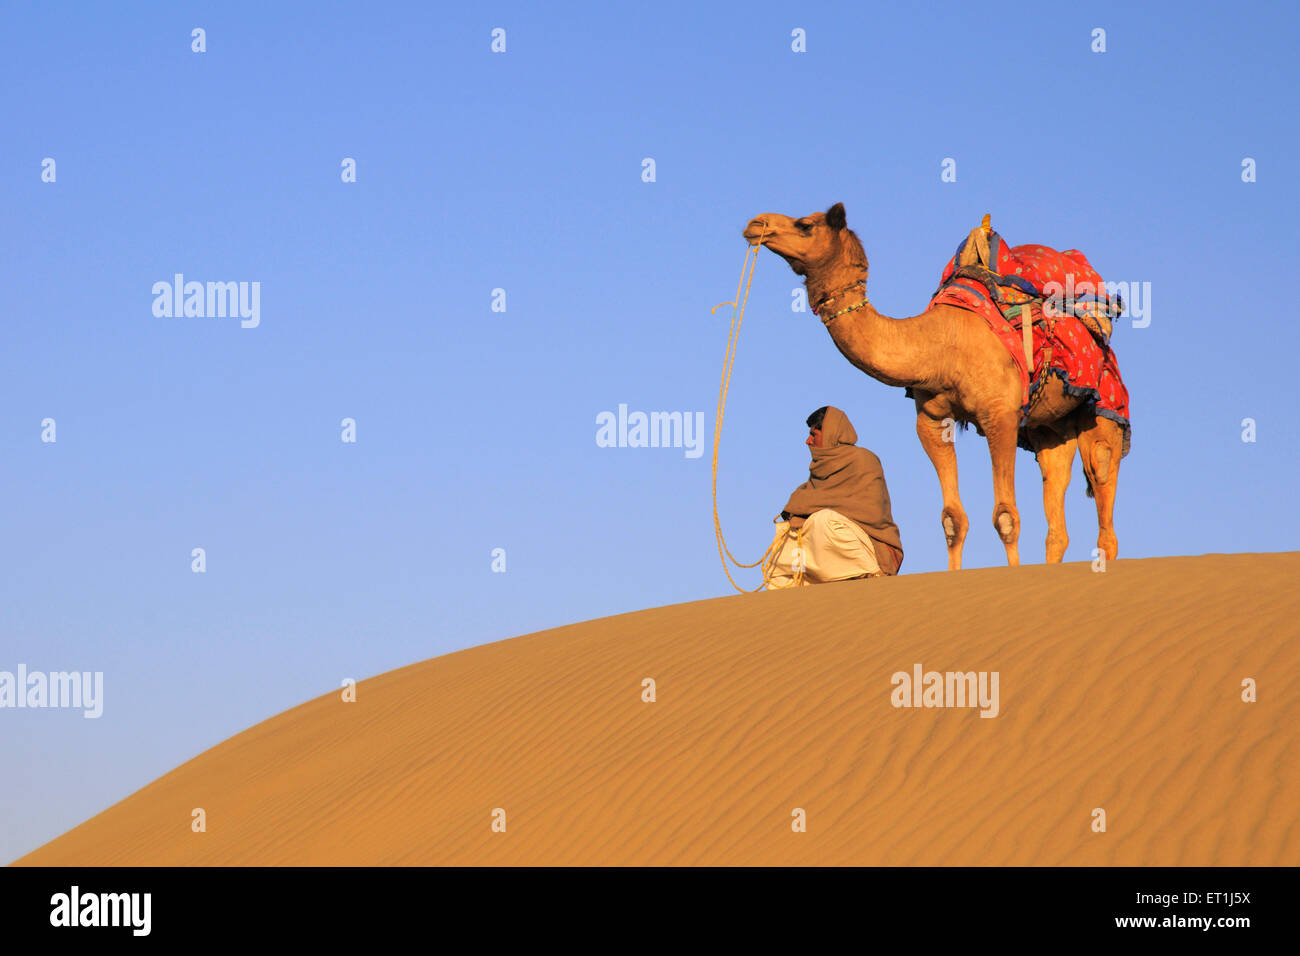 Camel standing with owner sitting on soft sand dune at Sam ; Jaisalmer ; Rajasthan ; India Stock Photo